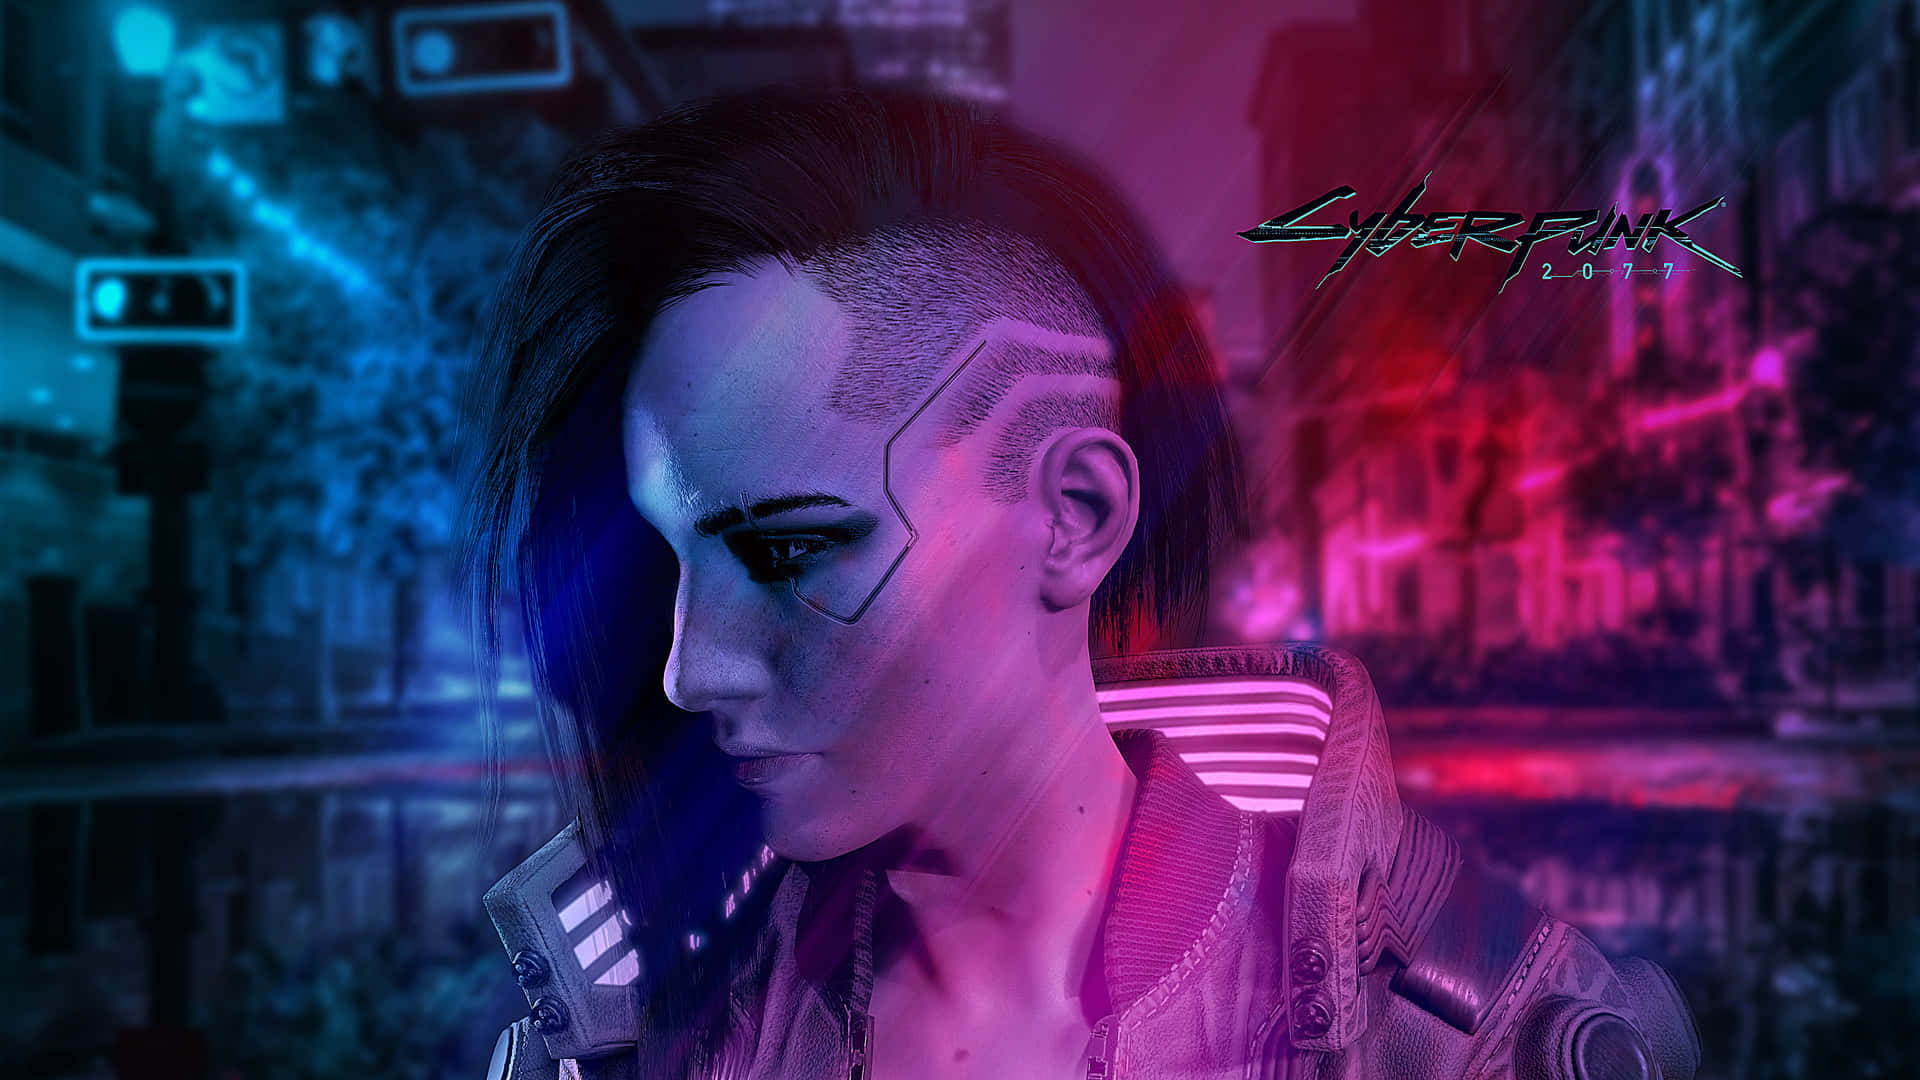 100+] Cyberpunk 2077 Characters Wallpapers